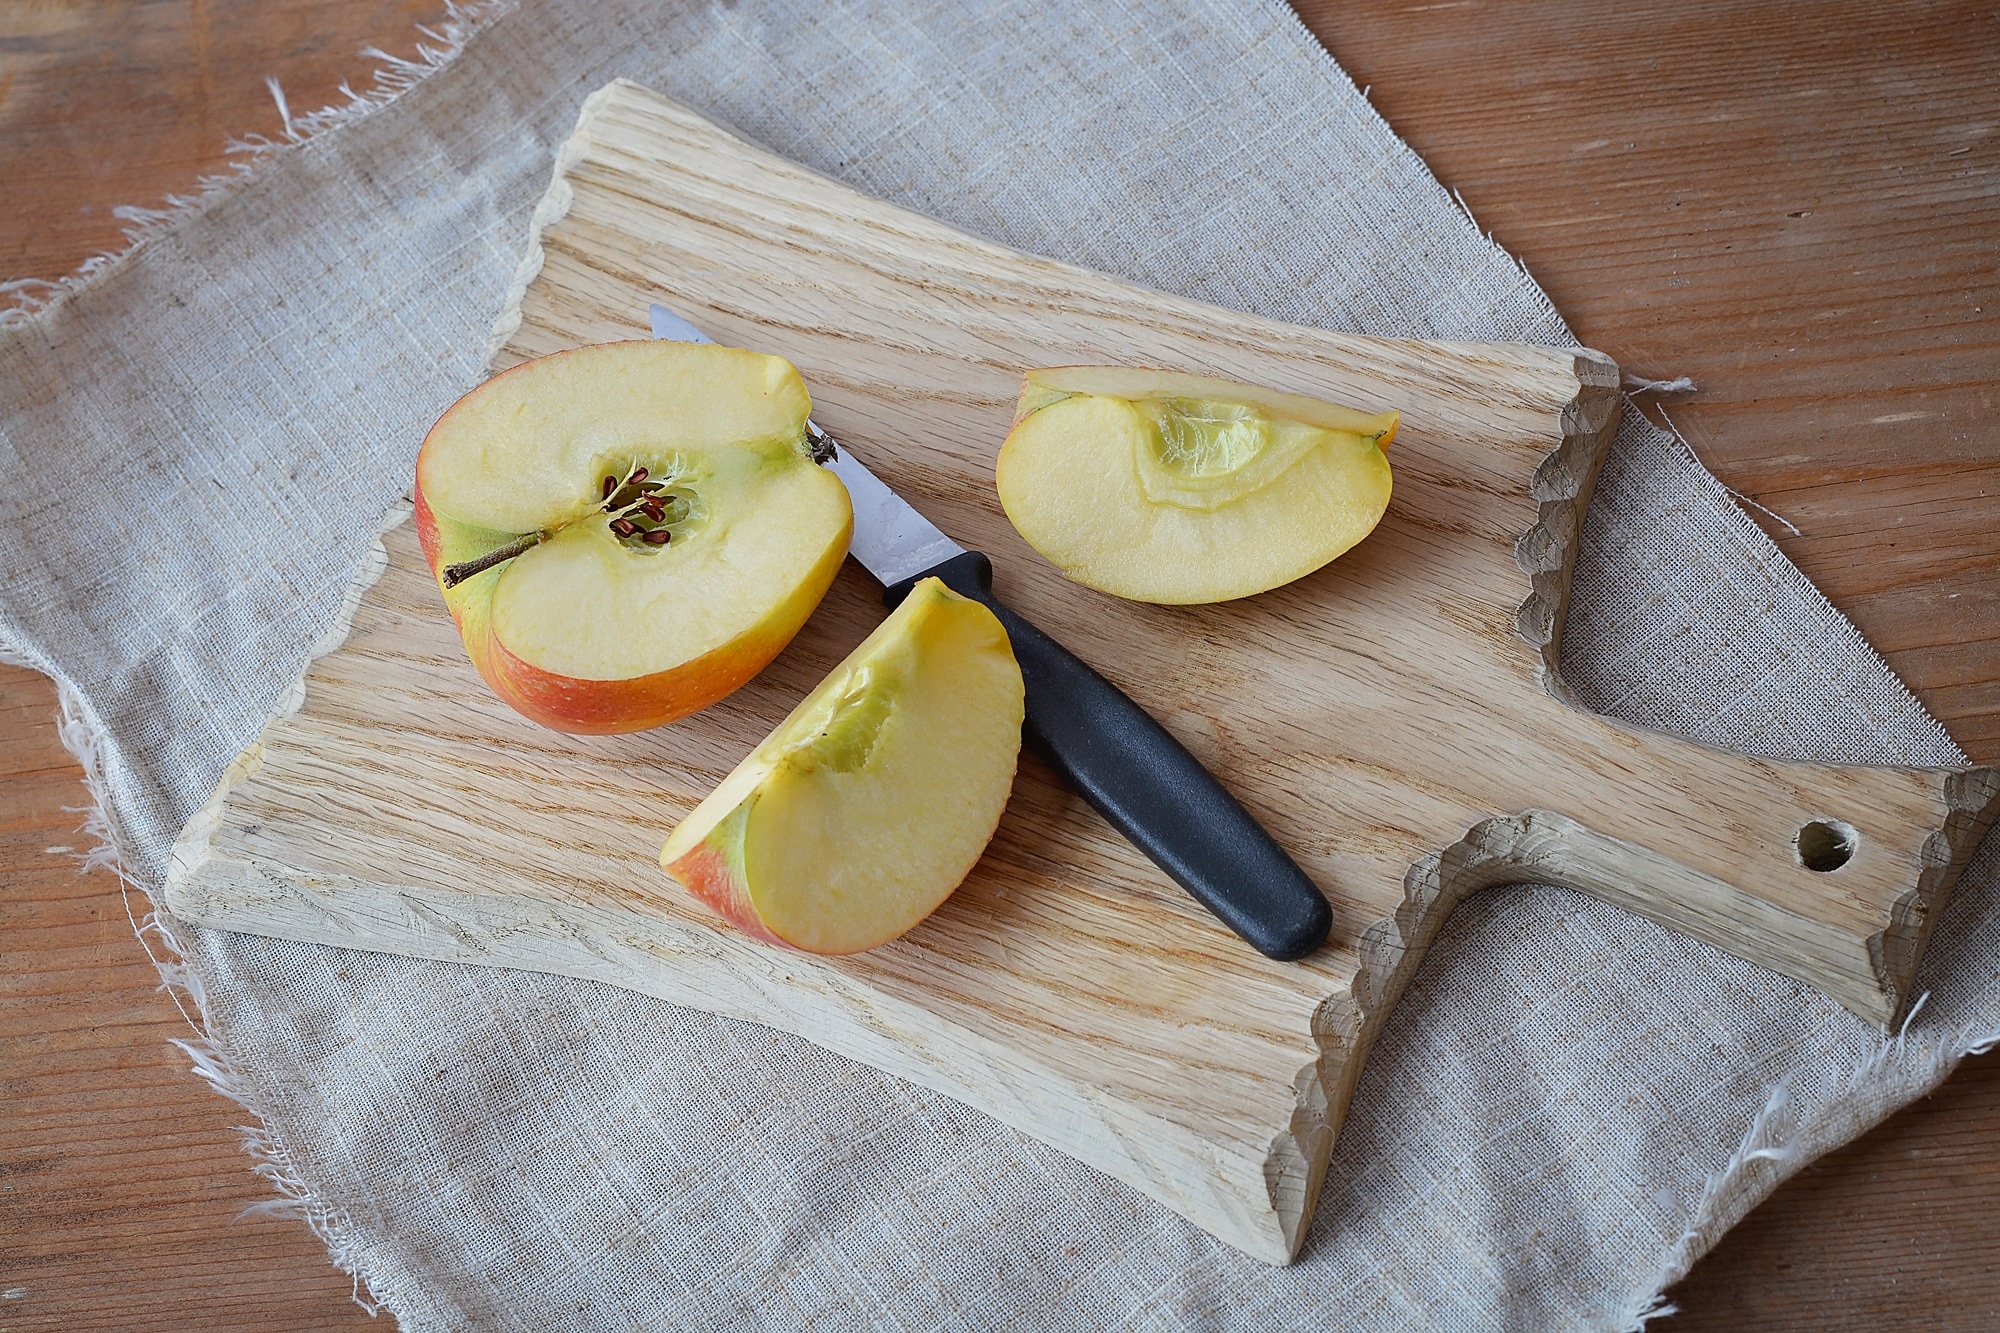 sliced apple beside knife and chopping board